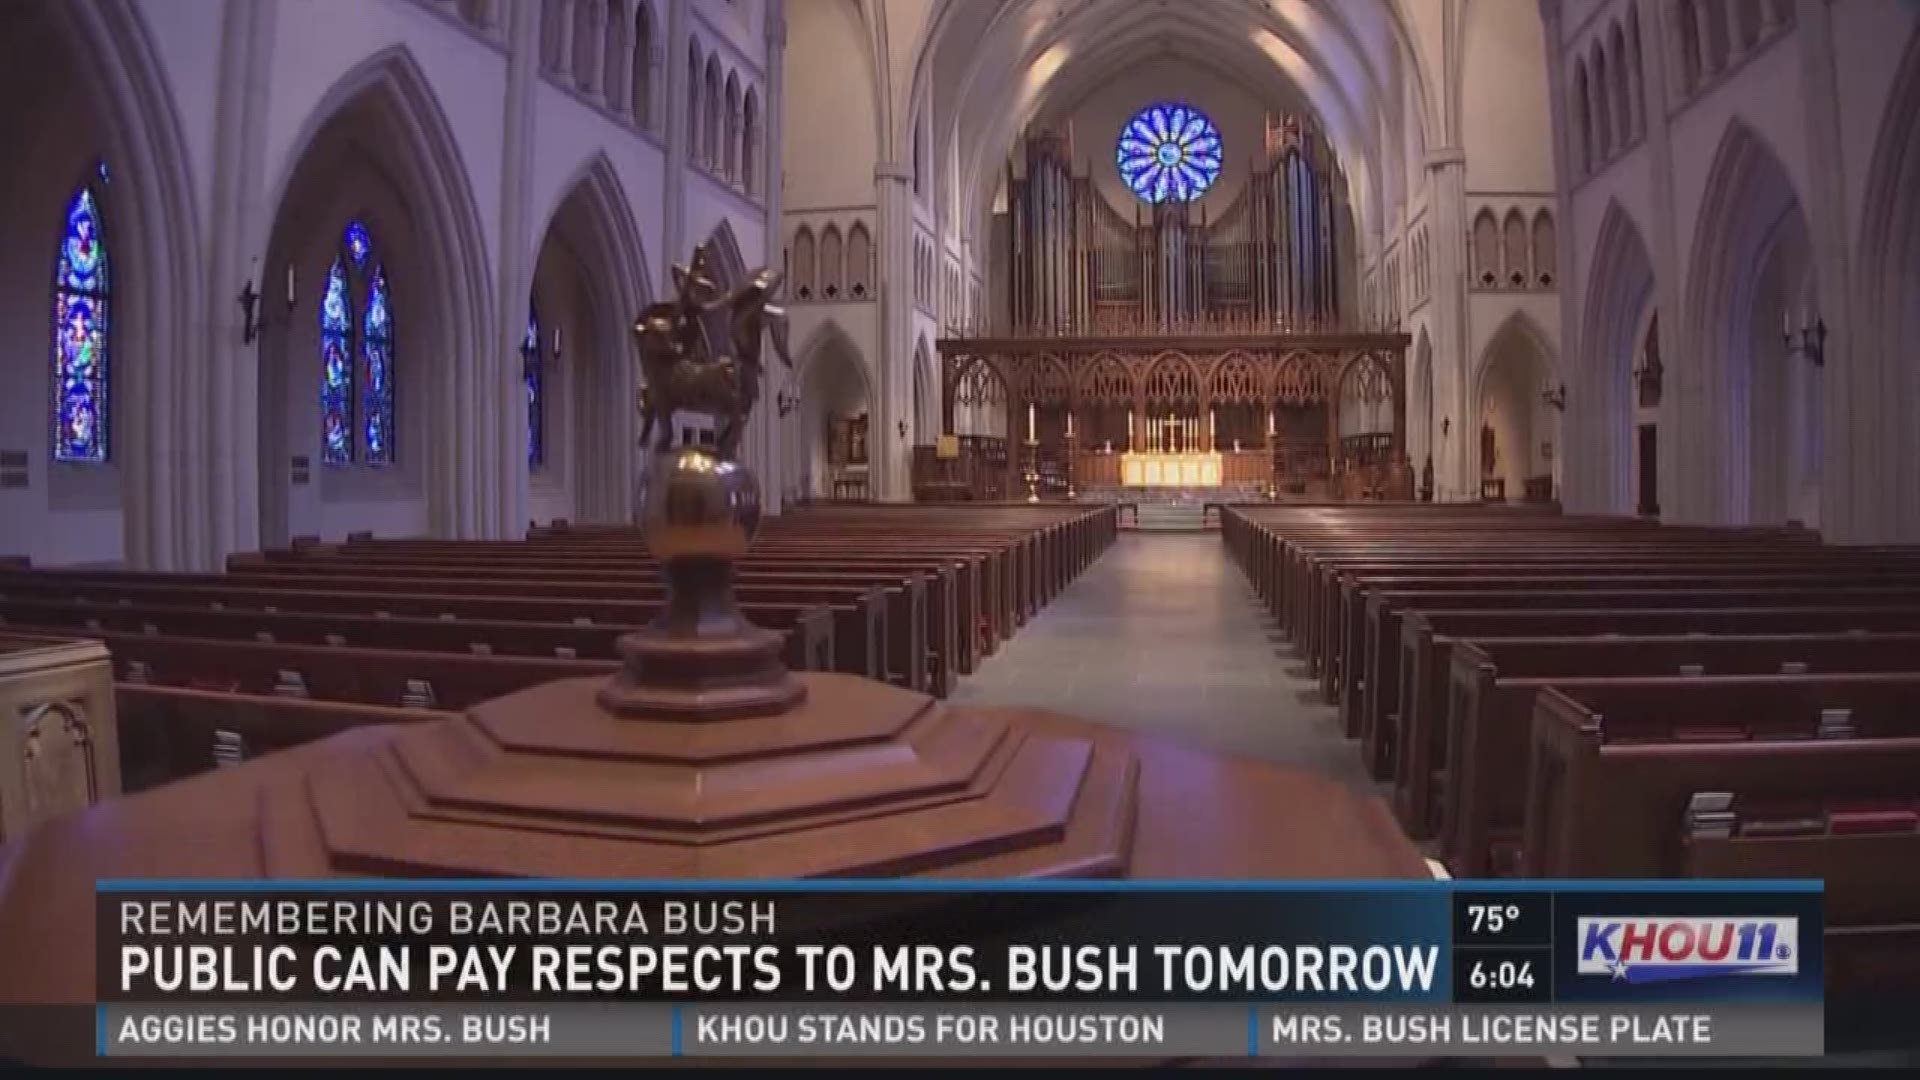 Heavy security presence and strict rules will be in place on Friday at St. Martin's Church for the Barbara Bush visitation. 